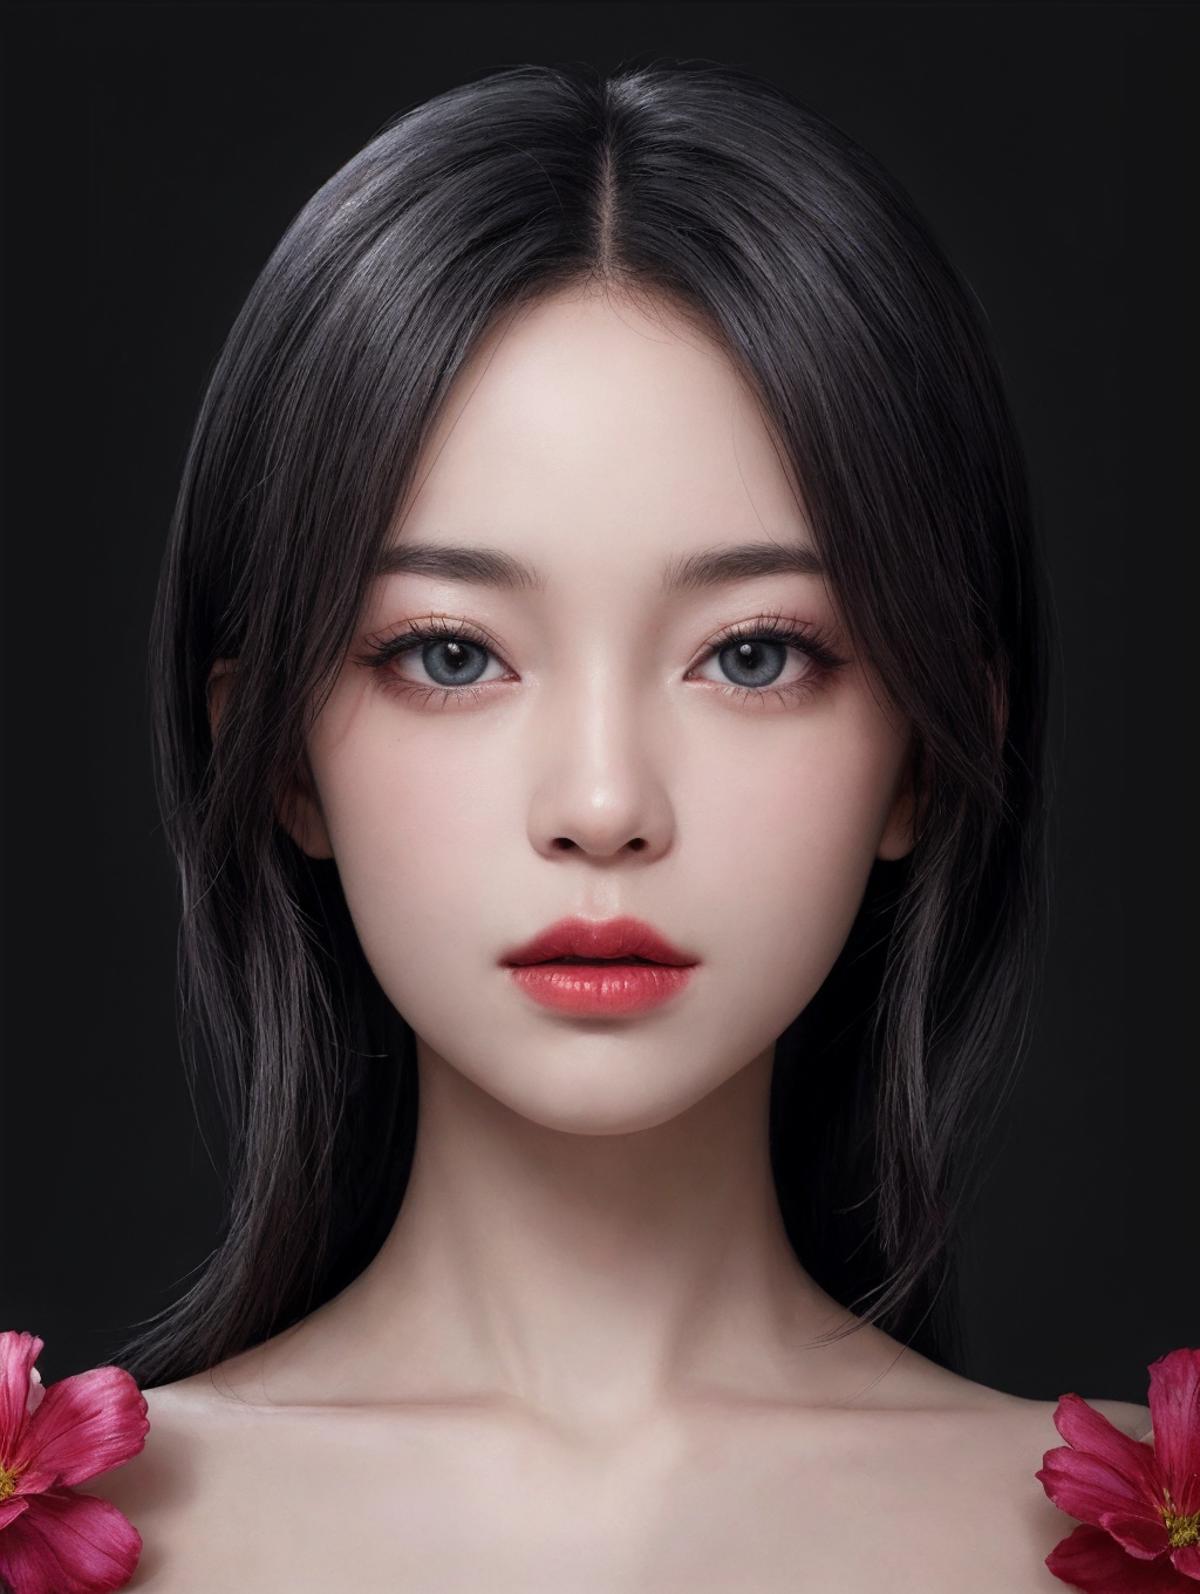 AI model image by boombbo275